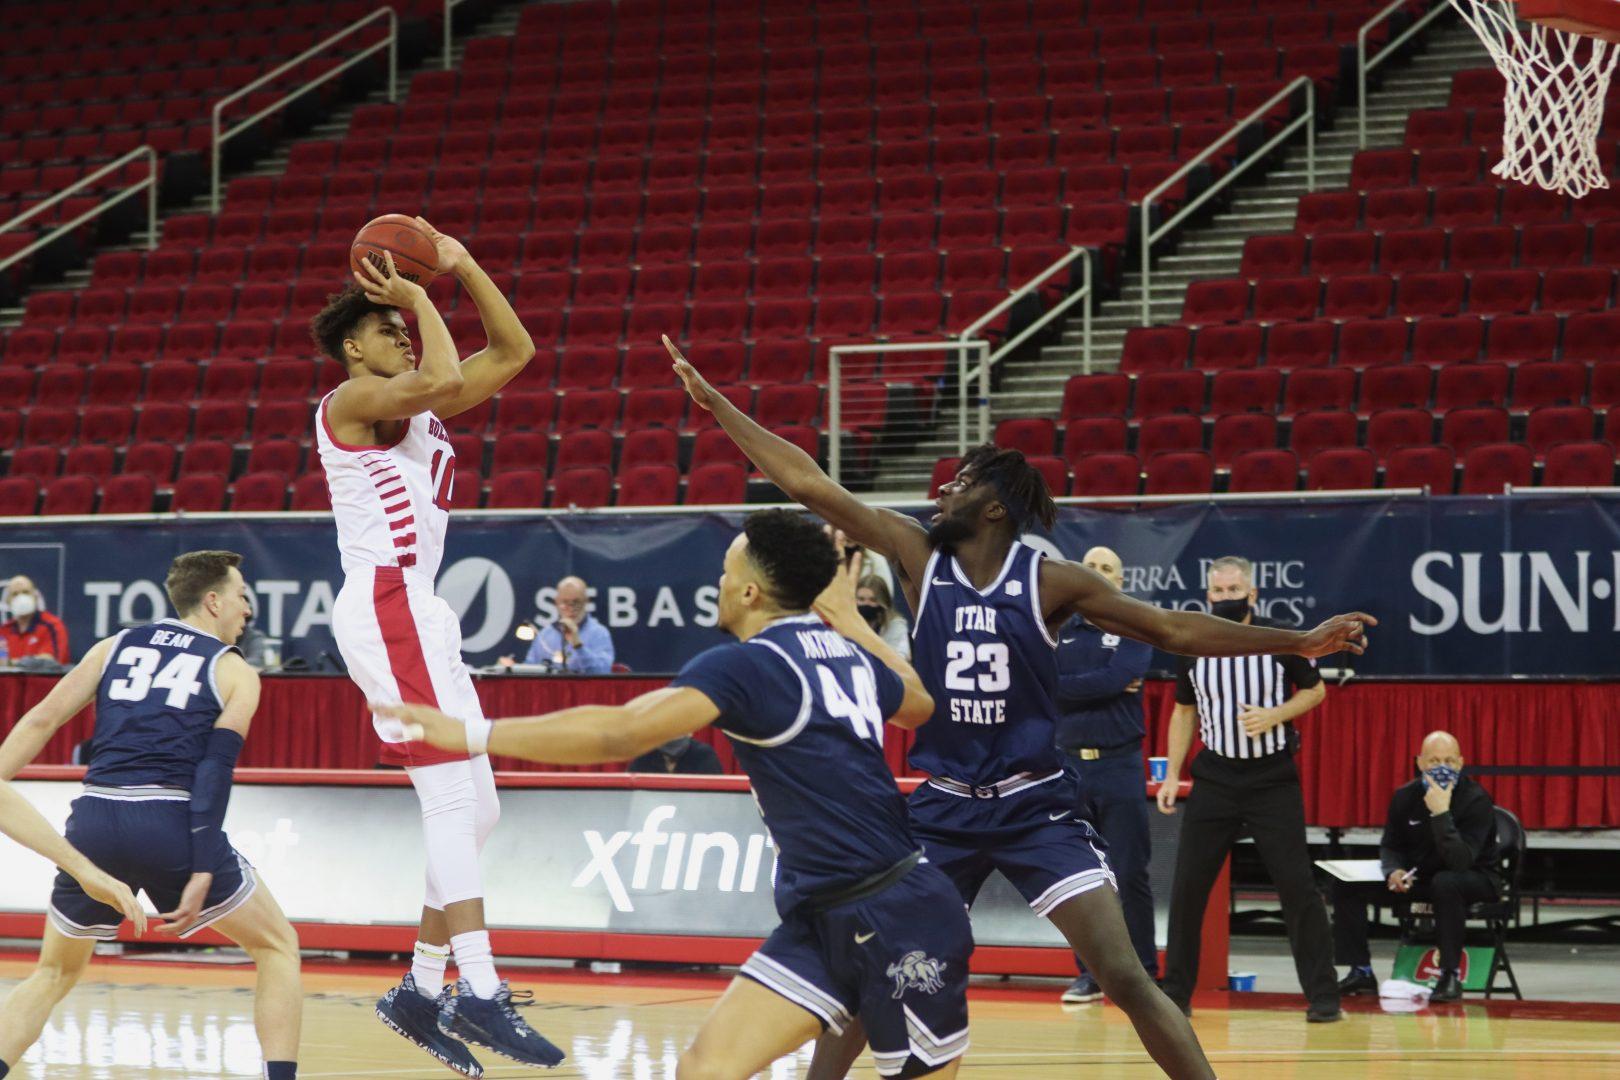 Fresno State forward Orlando Robinson pulls up for a two-pointer in the first half of its game against Utah State at the Save Mart Center on Thursday, Feb. 4, 2021. (Kameron Thorn/The Collegian)